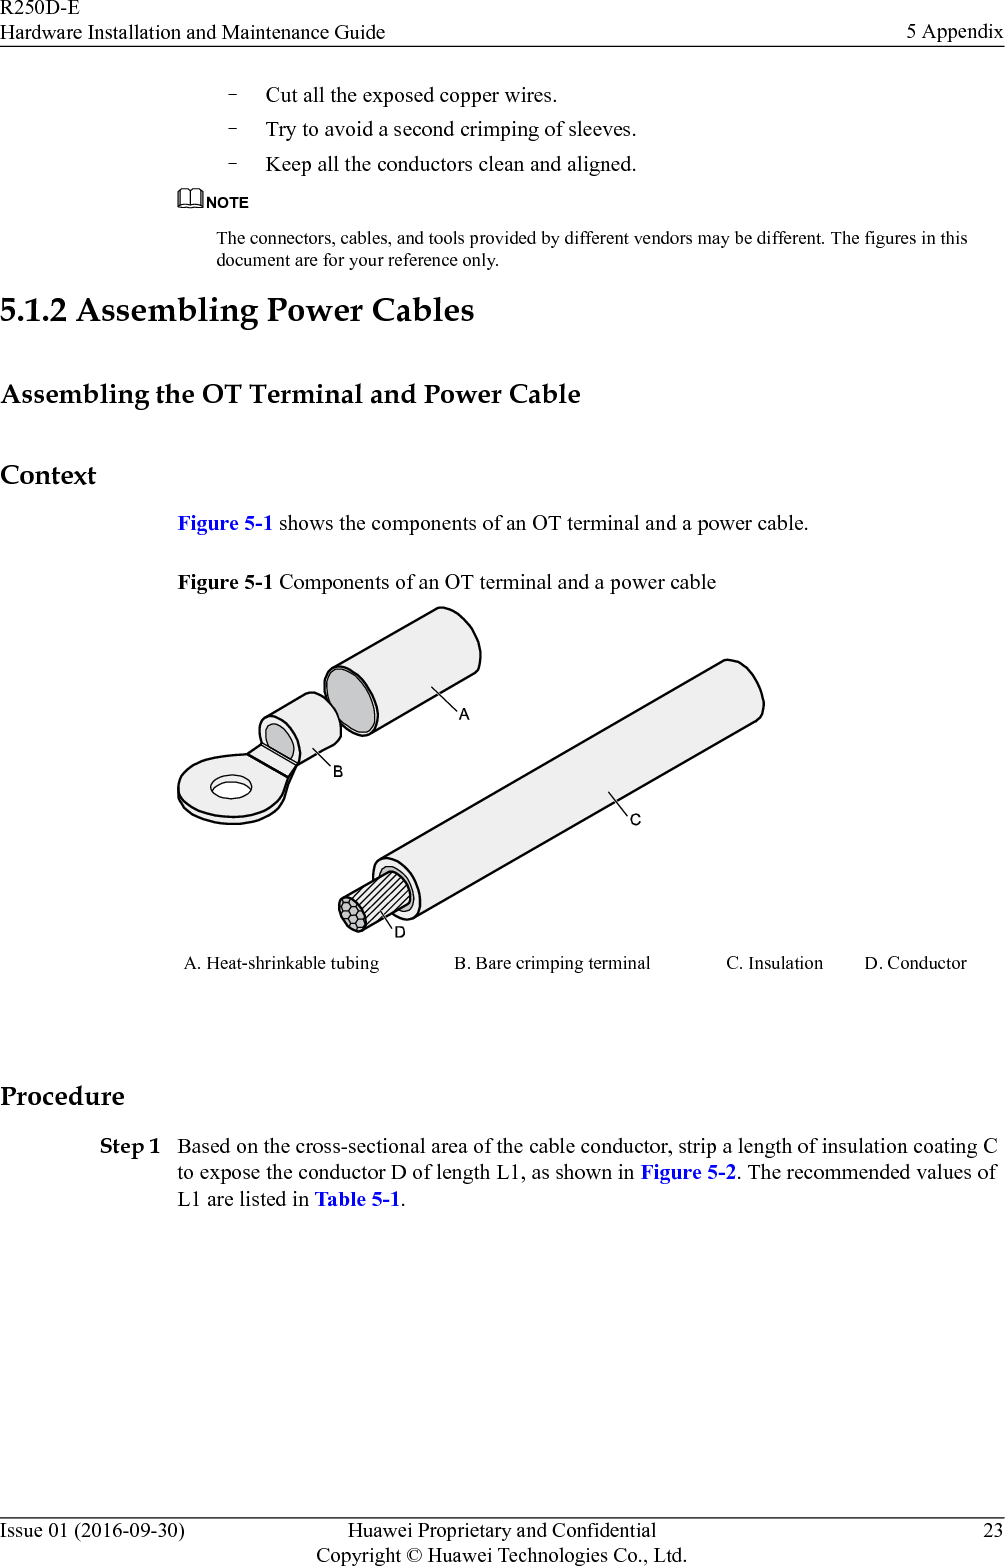 –Cut all the exposed copper wires.–Try to avoid a second crimping of sleeves.–Keep all the conductors clean and aligned.NOTEThe connectors, cables, and tools provided by different vendors may be different. The figures in thisdocument are for your reference only.5.1.2 Assembling Power CablesAssembling the OT Terminal and Power CableContextFigure 5-1 shows the components of an OT terminal and a power cable.Figure 5-1 Components of an OT terminal and a power cableA. Heat-shrinkable tubing B. Bare crimping terminal C. Insulation D. Conductor ProcedureStep 1 Based on the cross-sectional area of the cable conductor, strip a length of insulation coating Cto expose the conductor D of length L1, as shown in Figure 5-2. The recommended values ofL1 are listed in Table 5-1.R250D-EHardware Installation and Maintenance Guide 5 AppendixIssue 01 (2016-09-30) Huawei Proprietary and ConfidentialCopyright © Huawei Technologies Co., Ltd.23